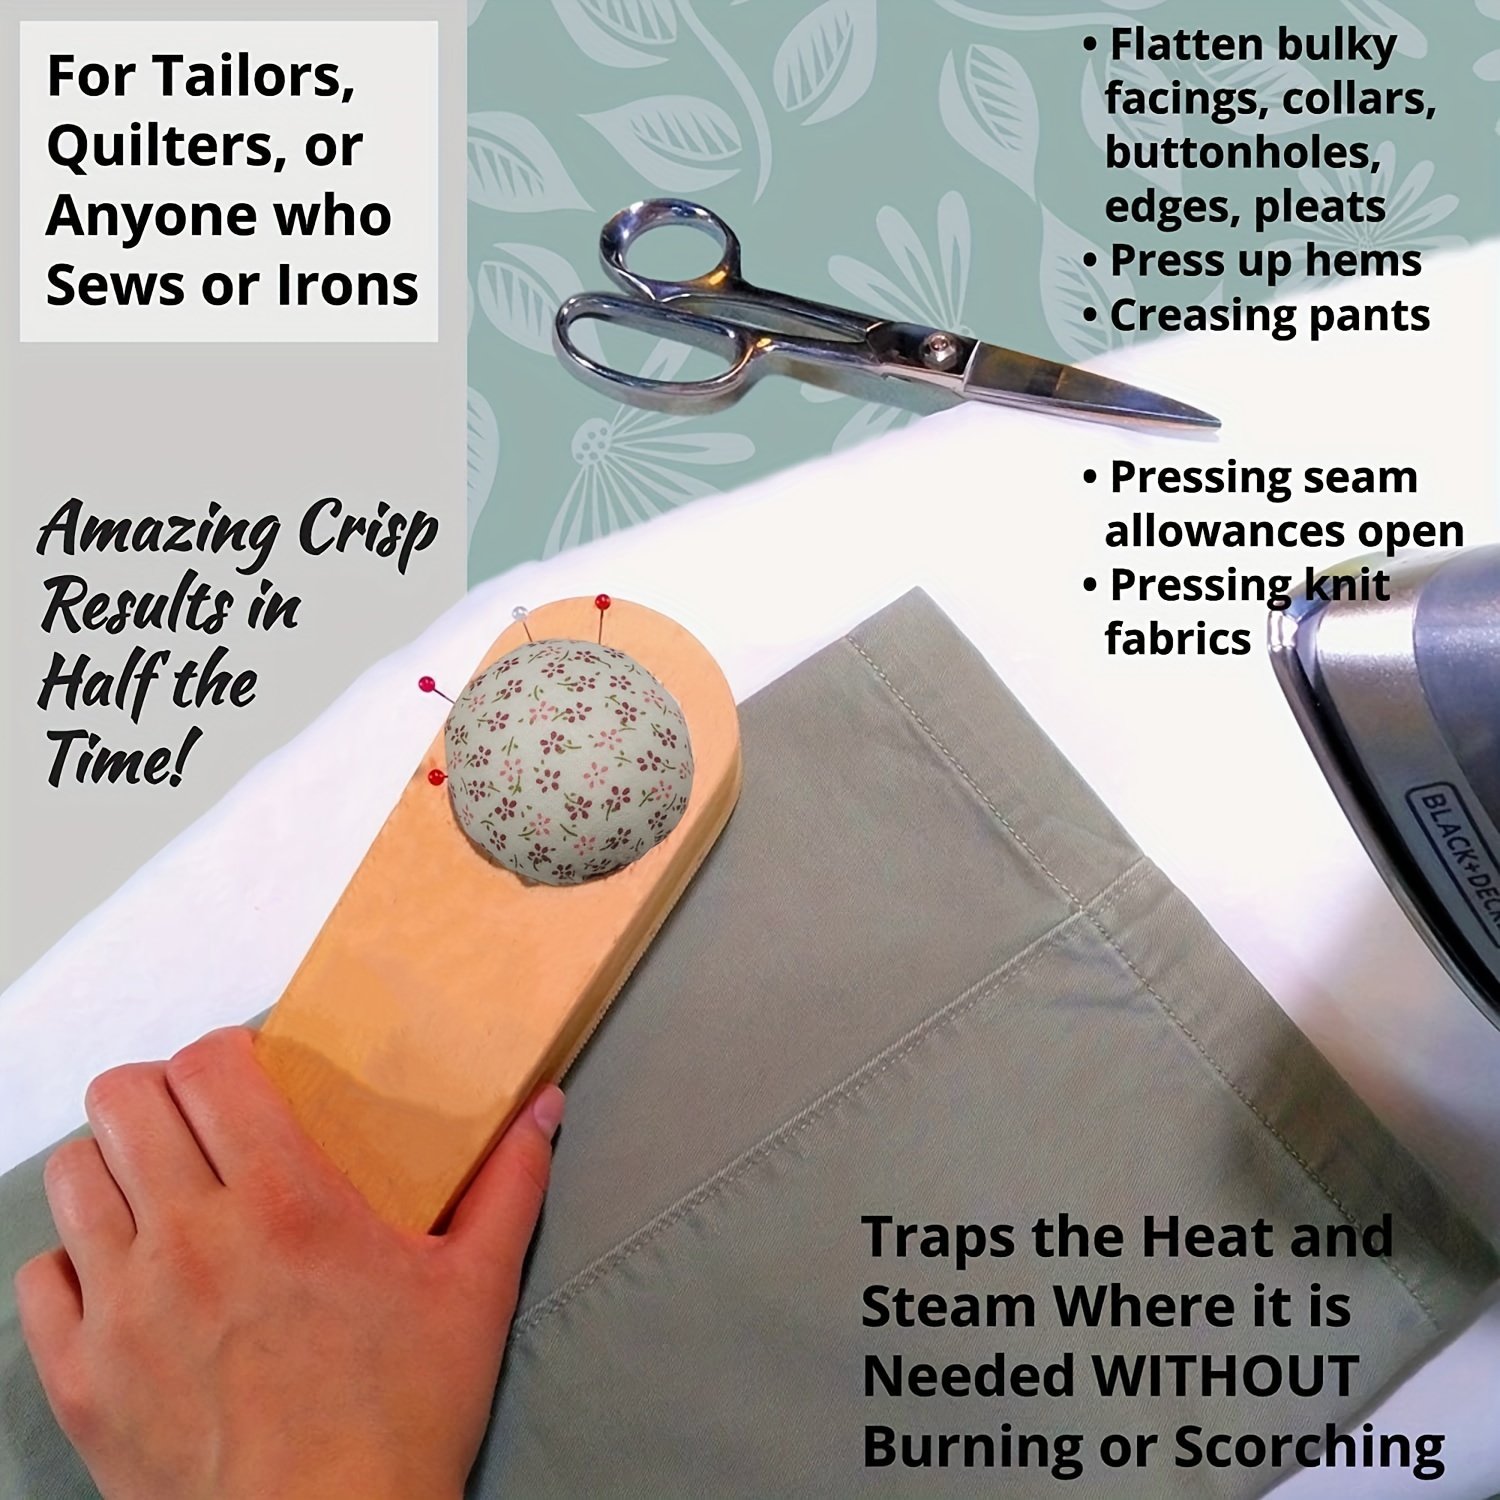 Wood Tailors Clapper Pressing Large for Sewing Dressmaking Quilting 